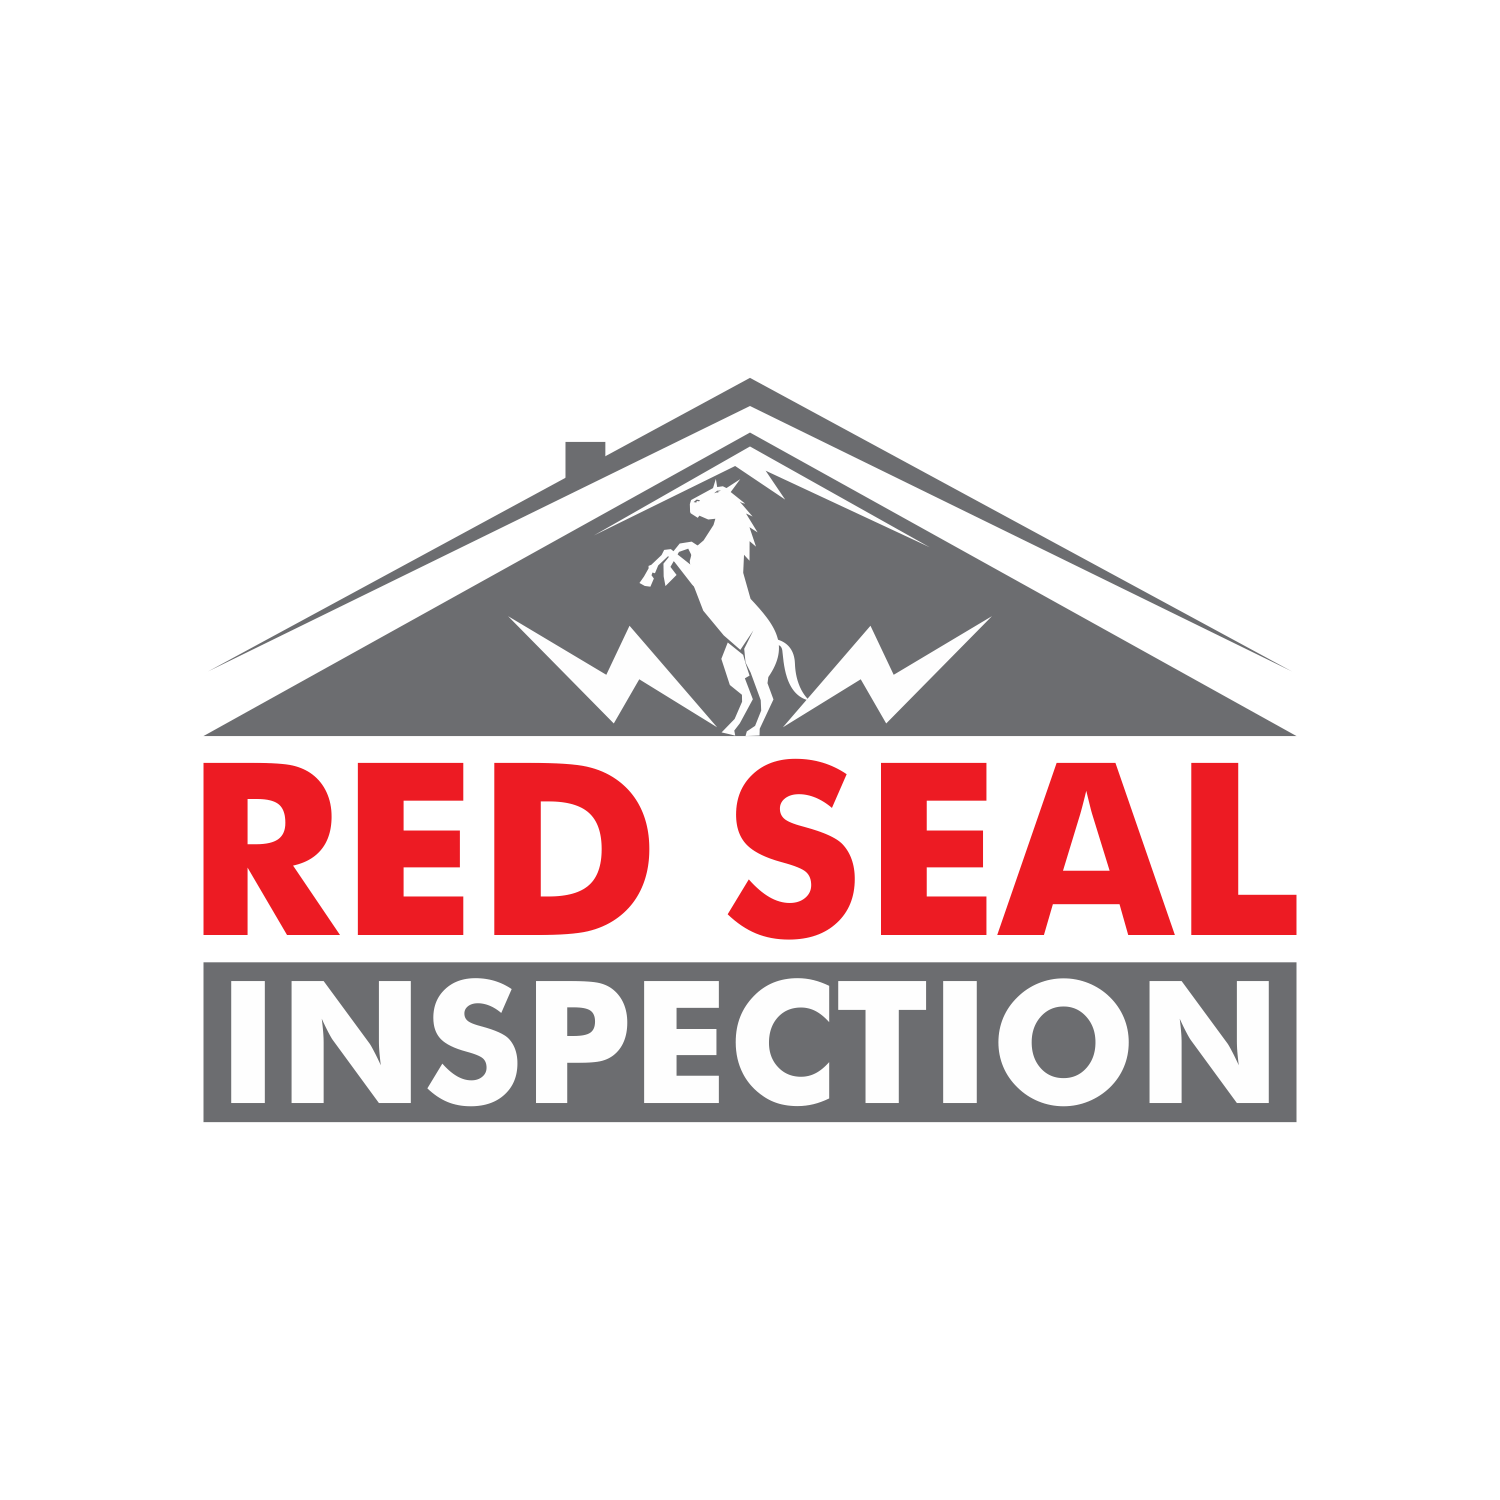 Red Seal Logo - Serious, Professional, Home Inspection Logo Design for Red Seal ...